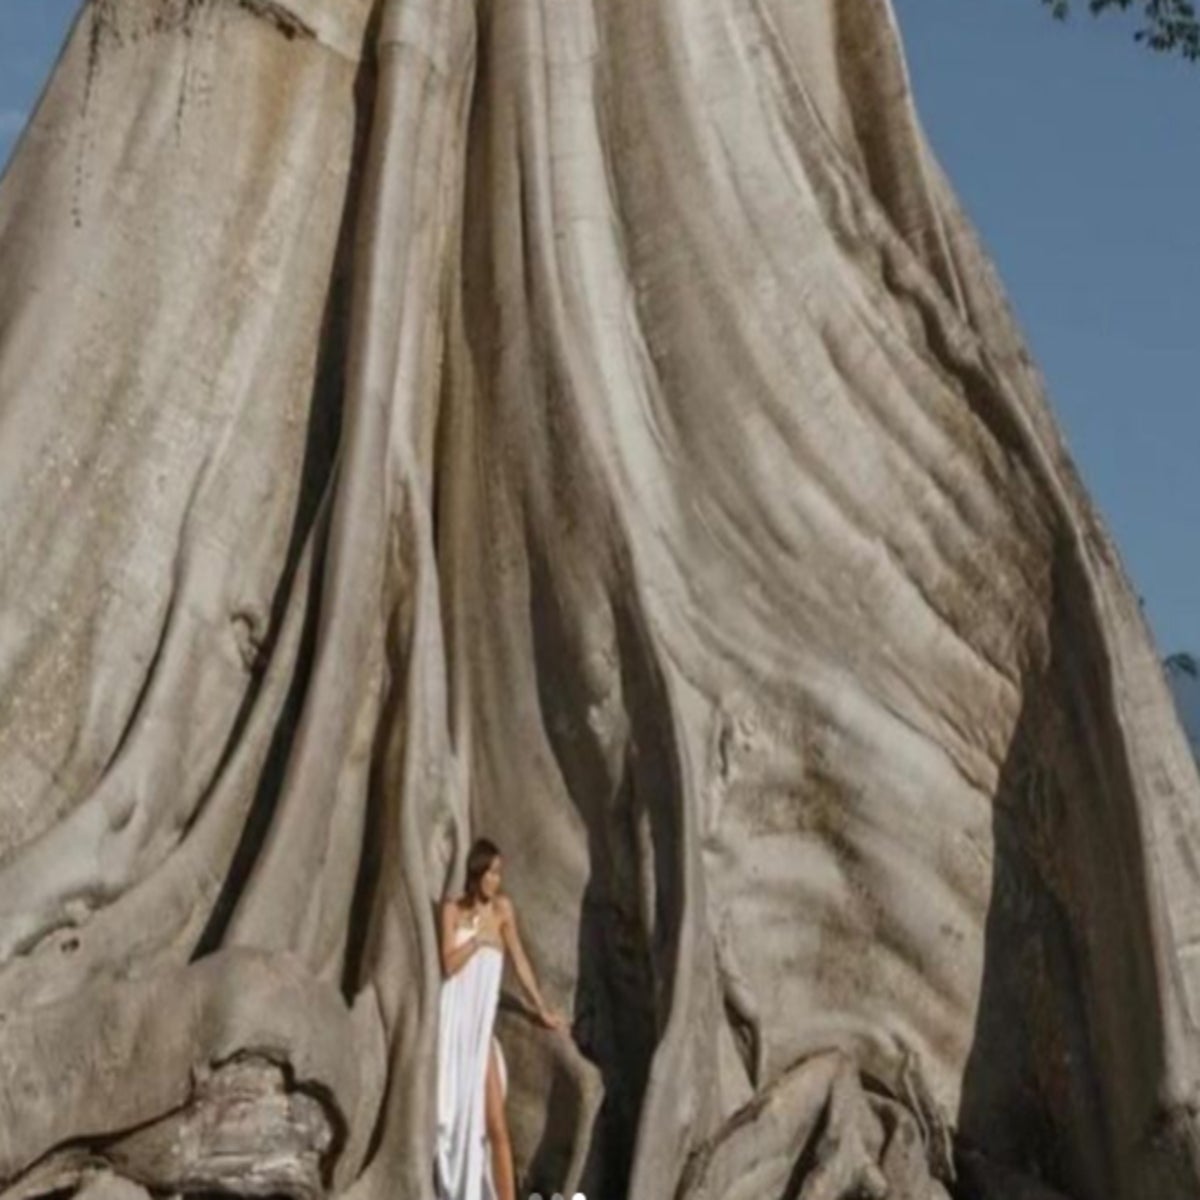 Russian woman who posed nude in front of sacred tree deported from Bali |  The Independent